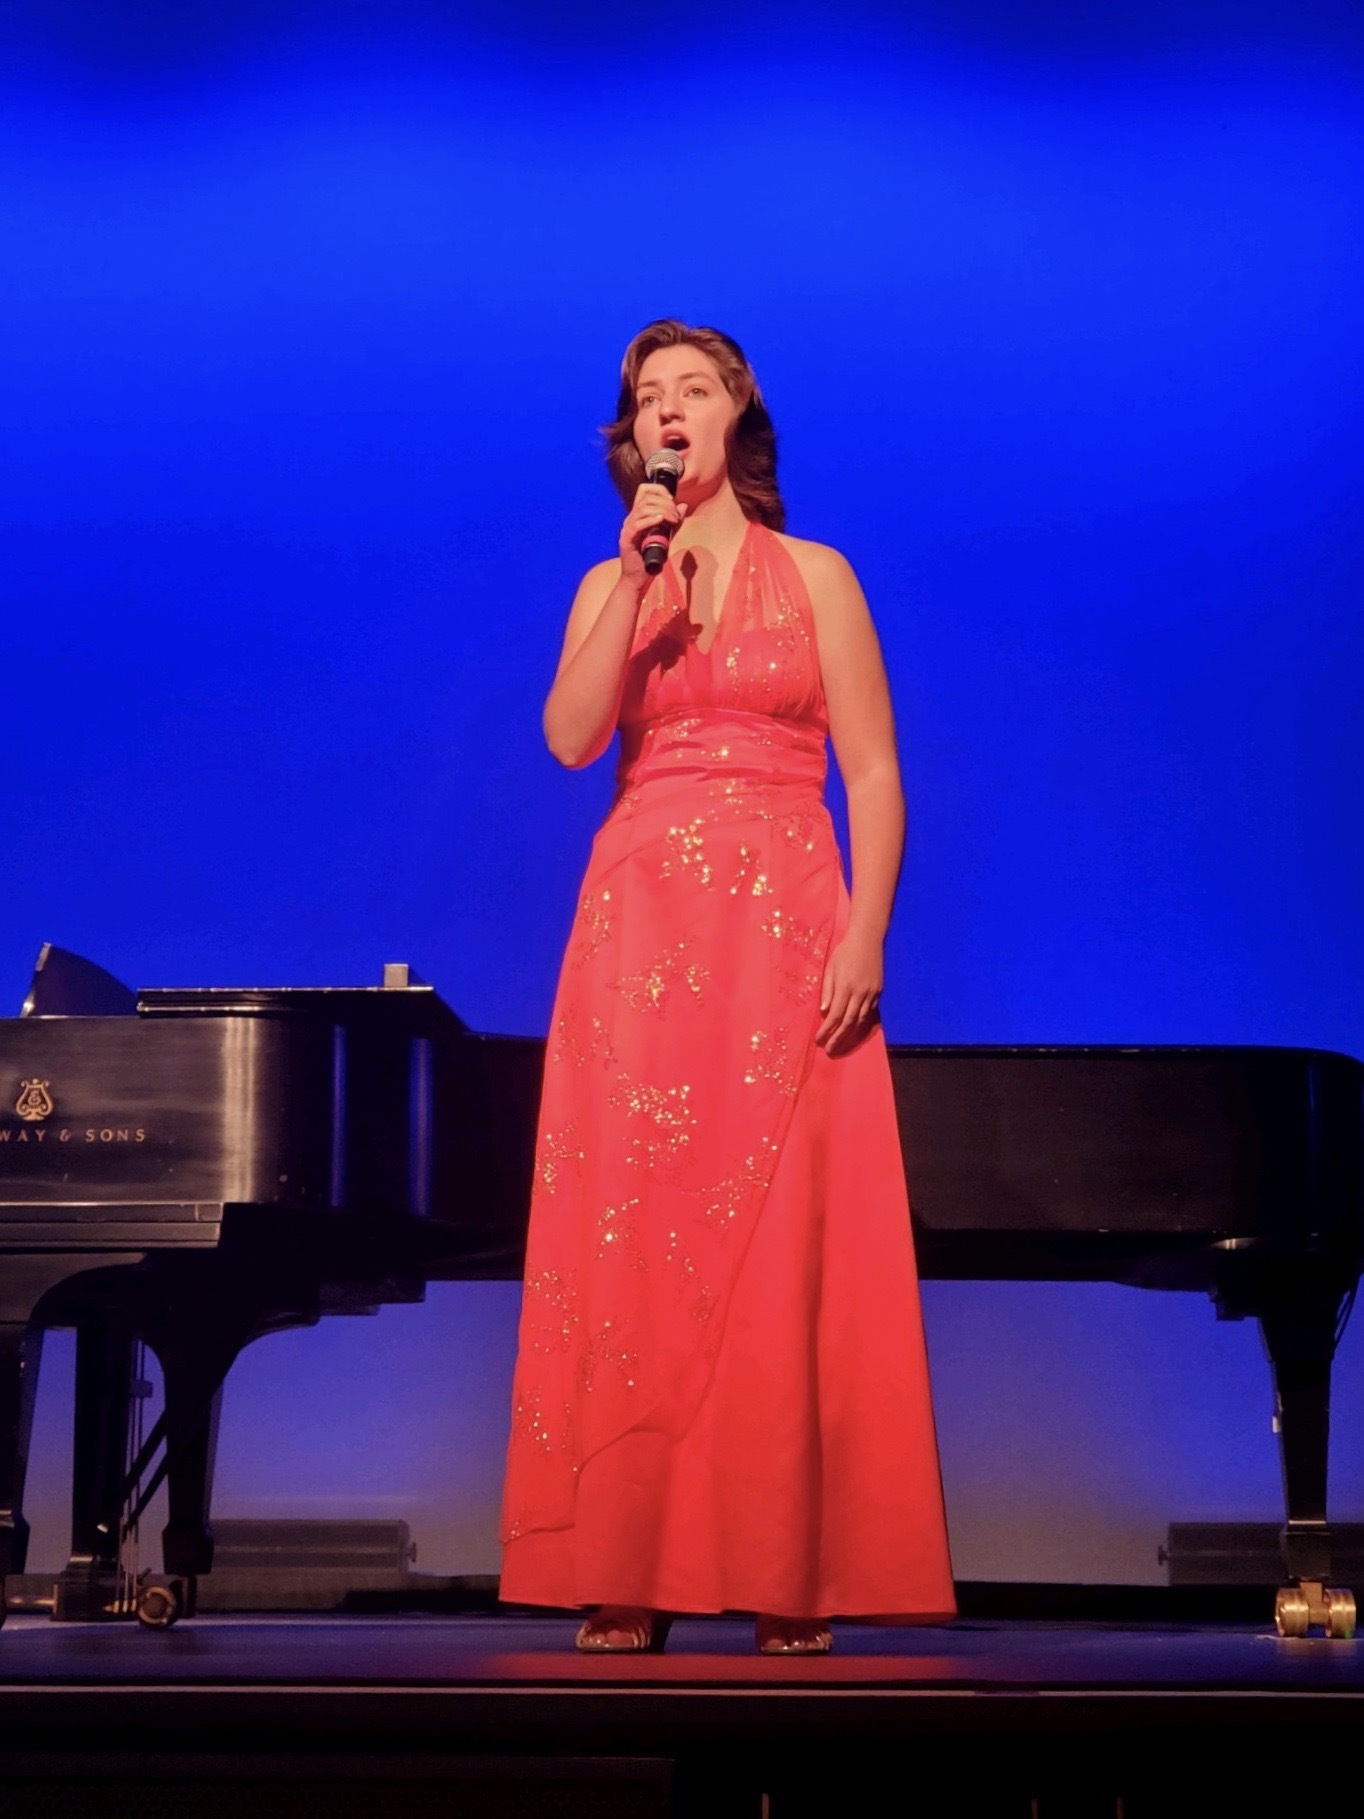 Alison Pensa from Hampton Bays High School performing the title track from “The Sound of Music” during the virtual 2020 Teeny Awards.